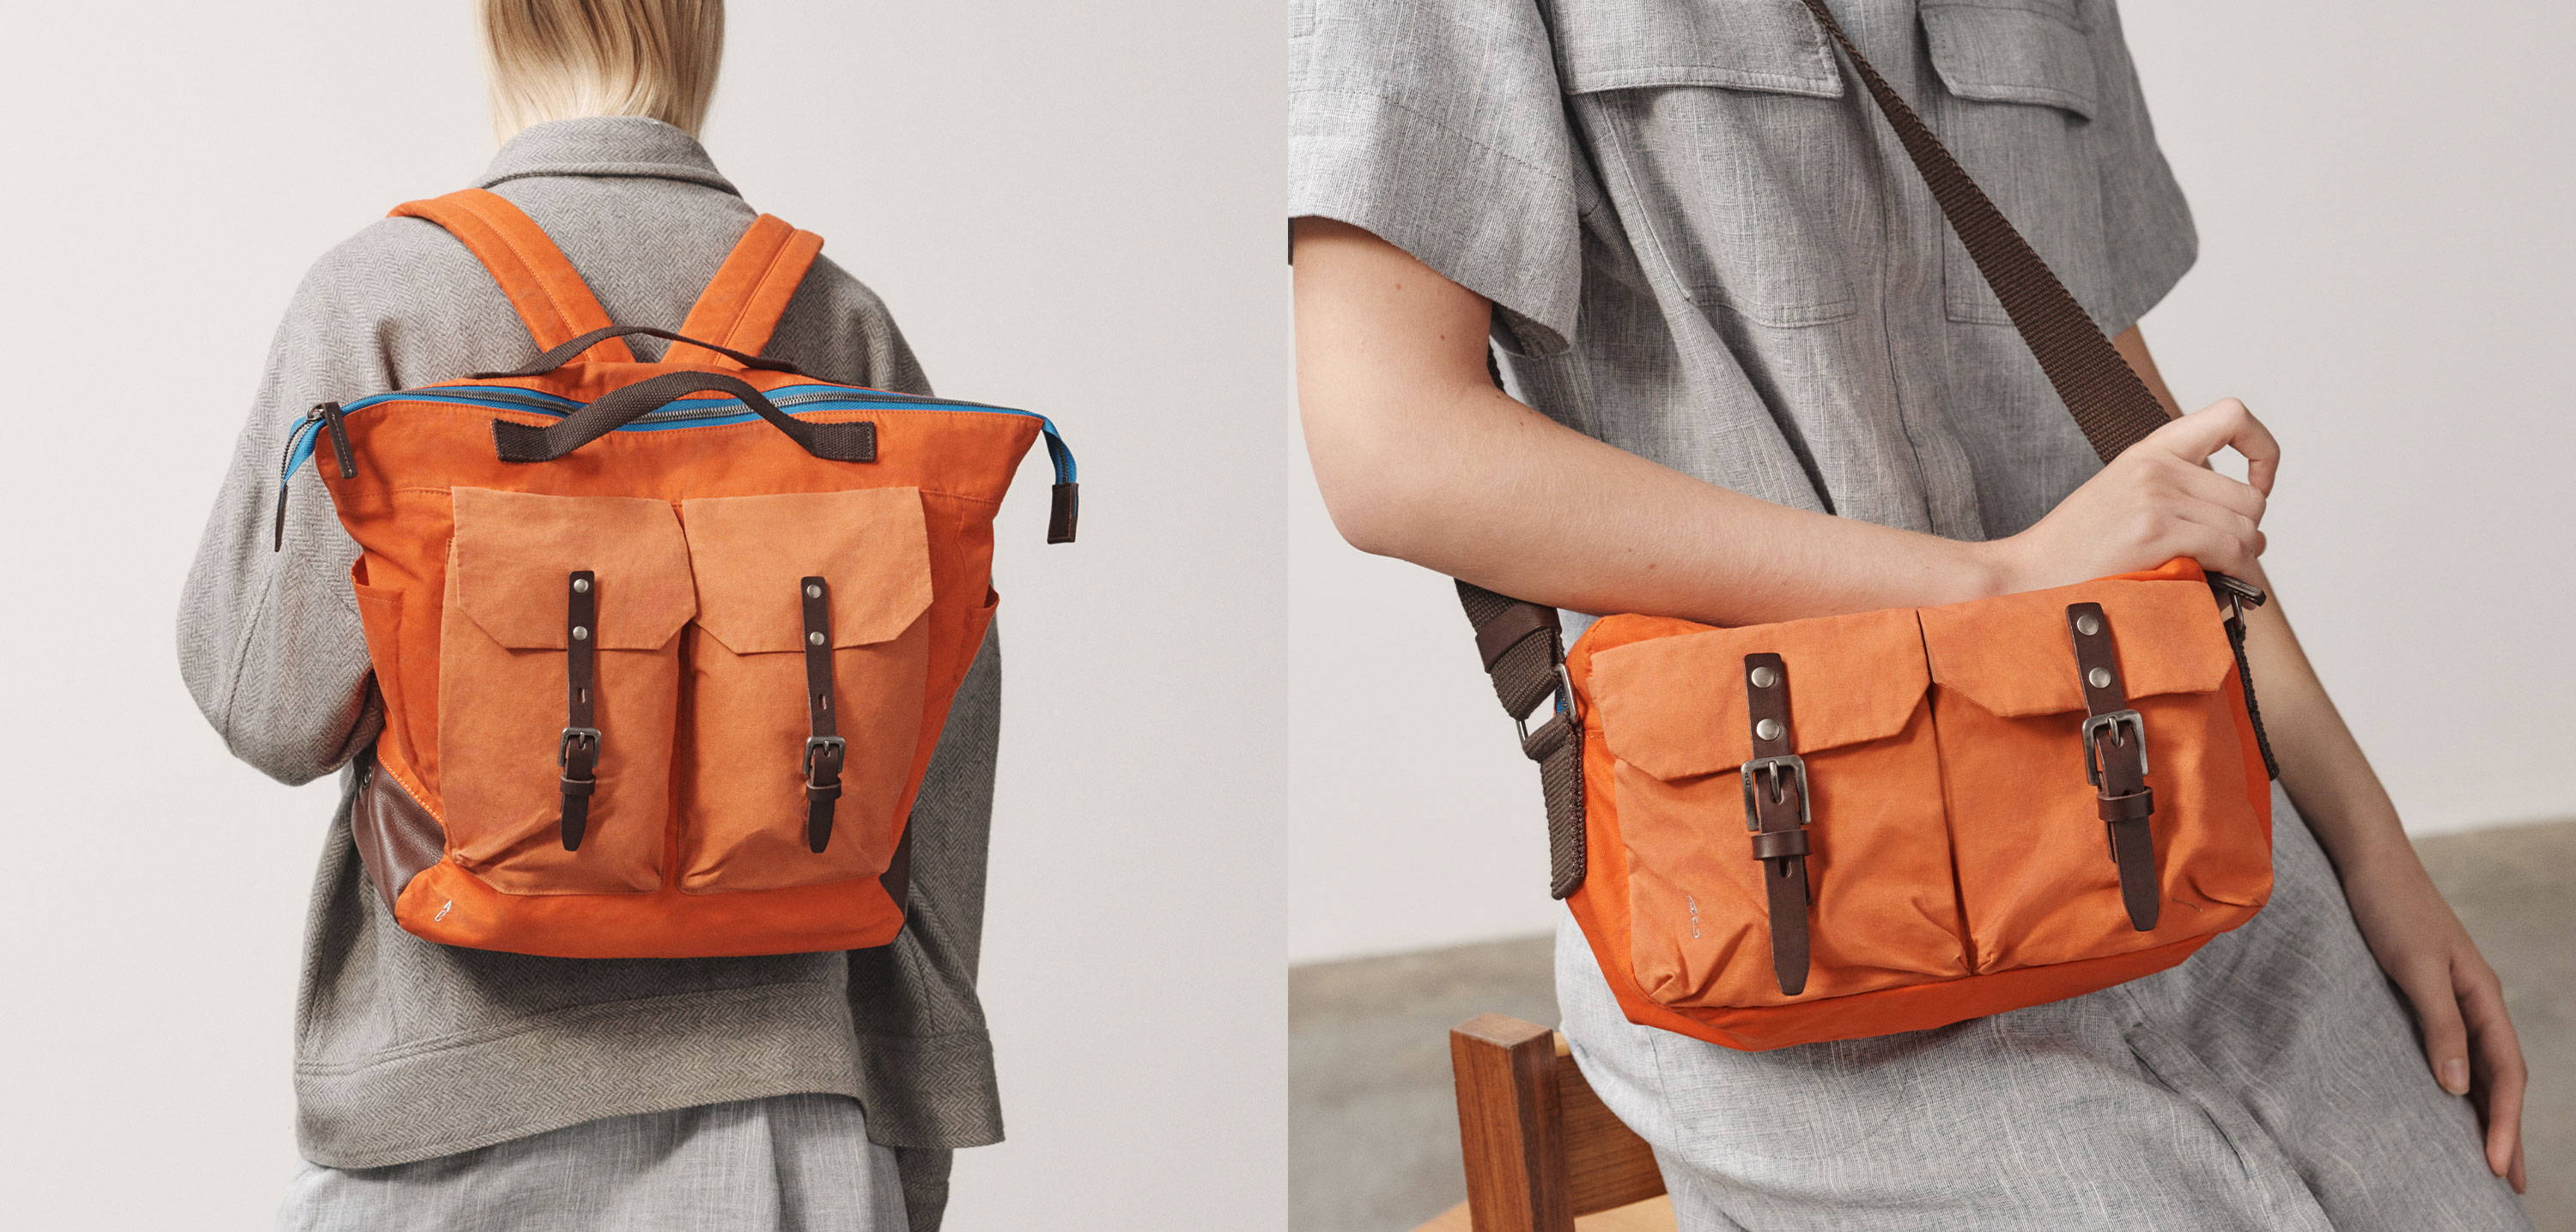 Ally Capellino AW22 Pre Fall Campaign Bi-Colour Waxed Cotton Backpack and Crossbody Bag